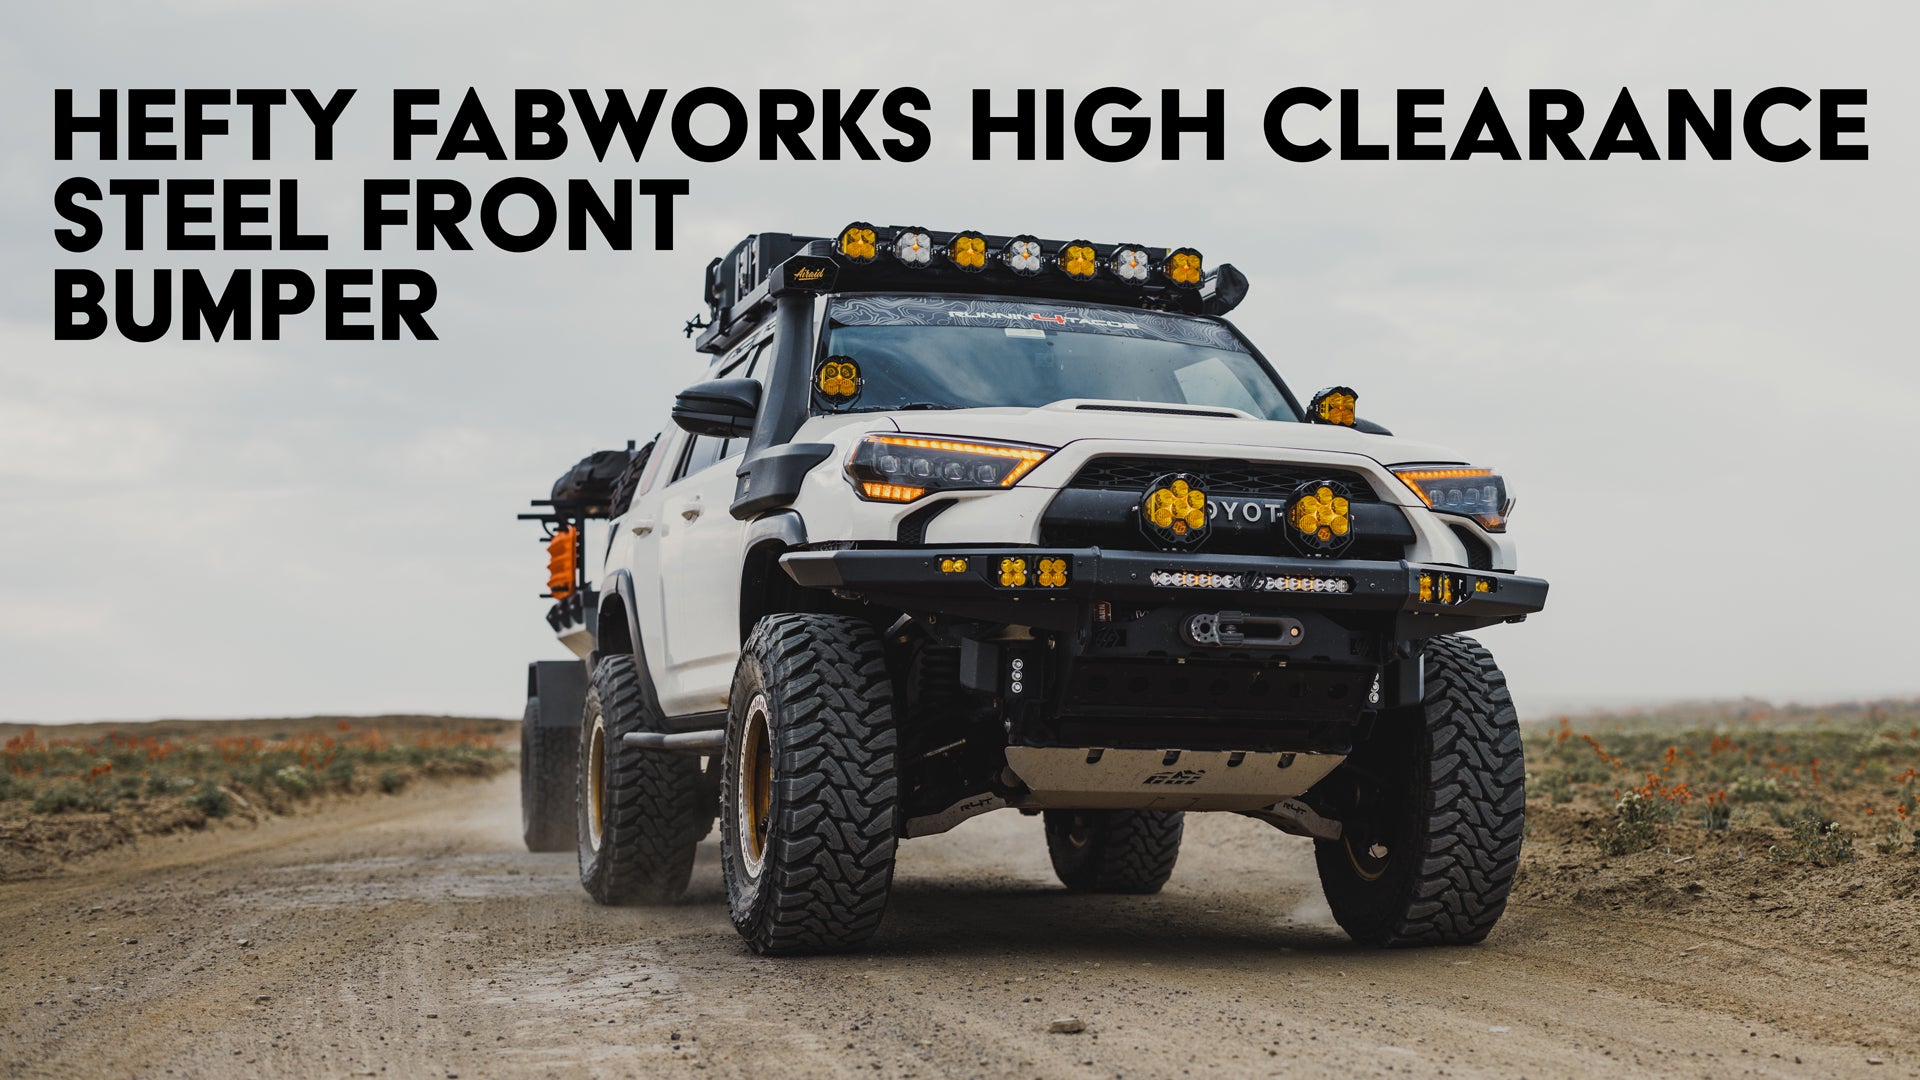 The Ultimate Guide to the Hefty Fabworks High Clearance Steel Front Bumper for the 2010 and newer Toyota 4Runner